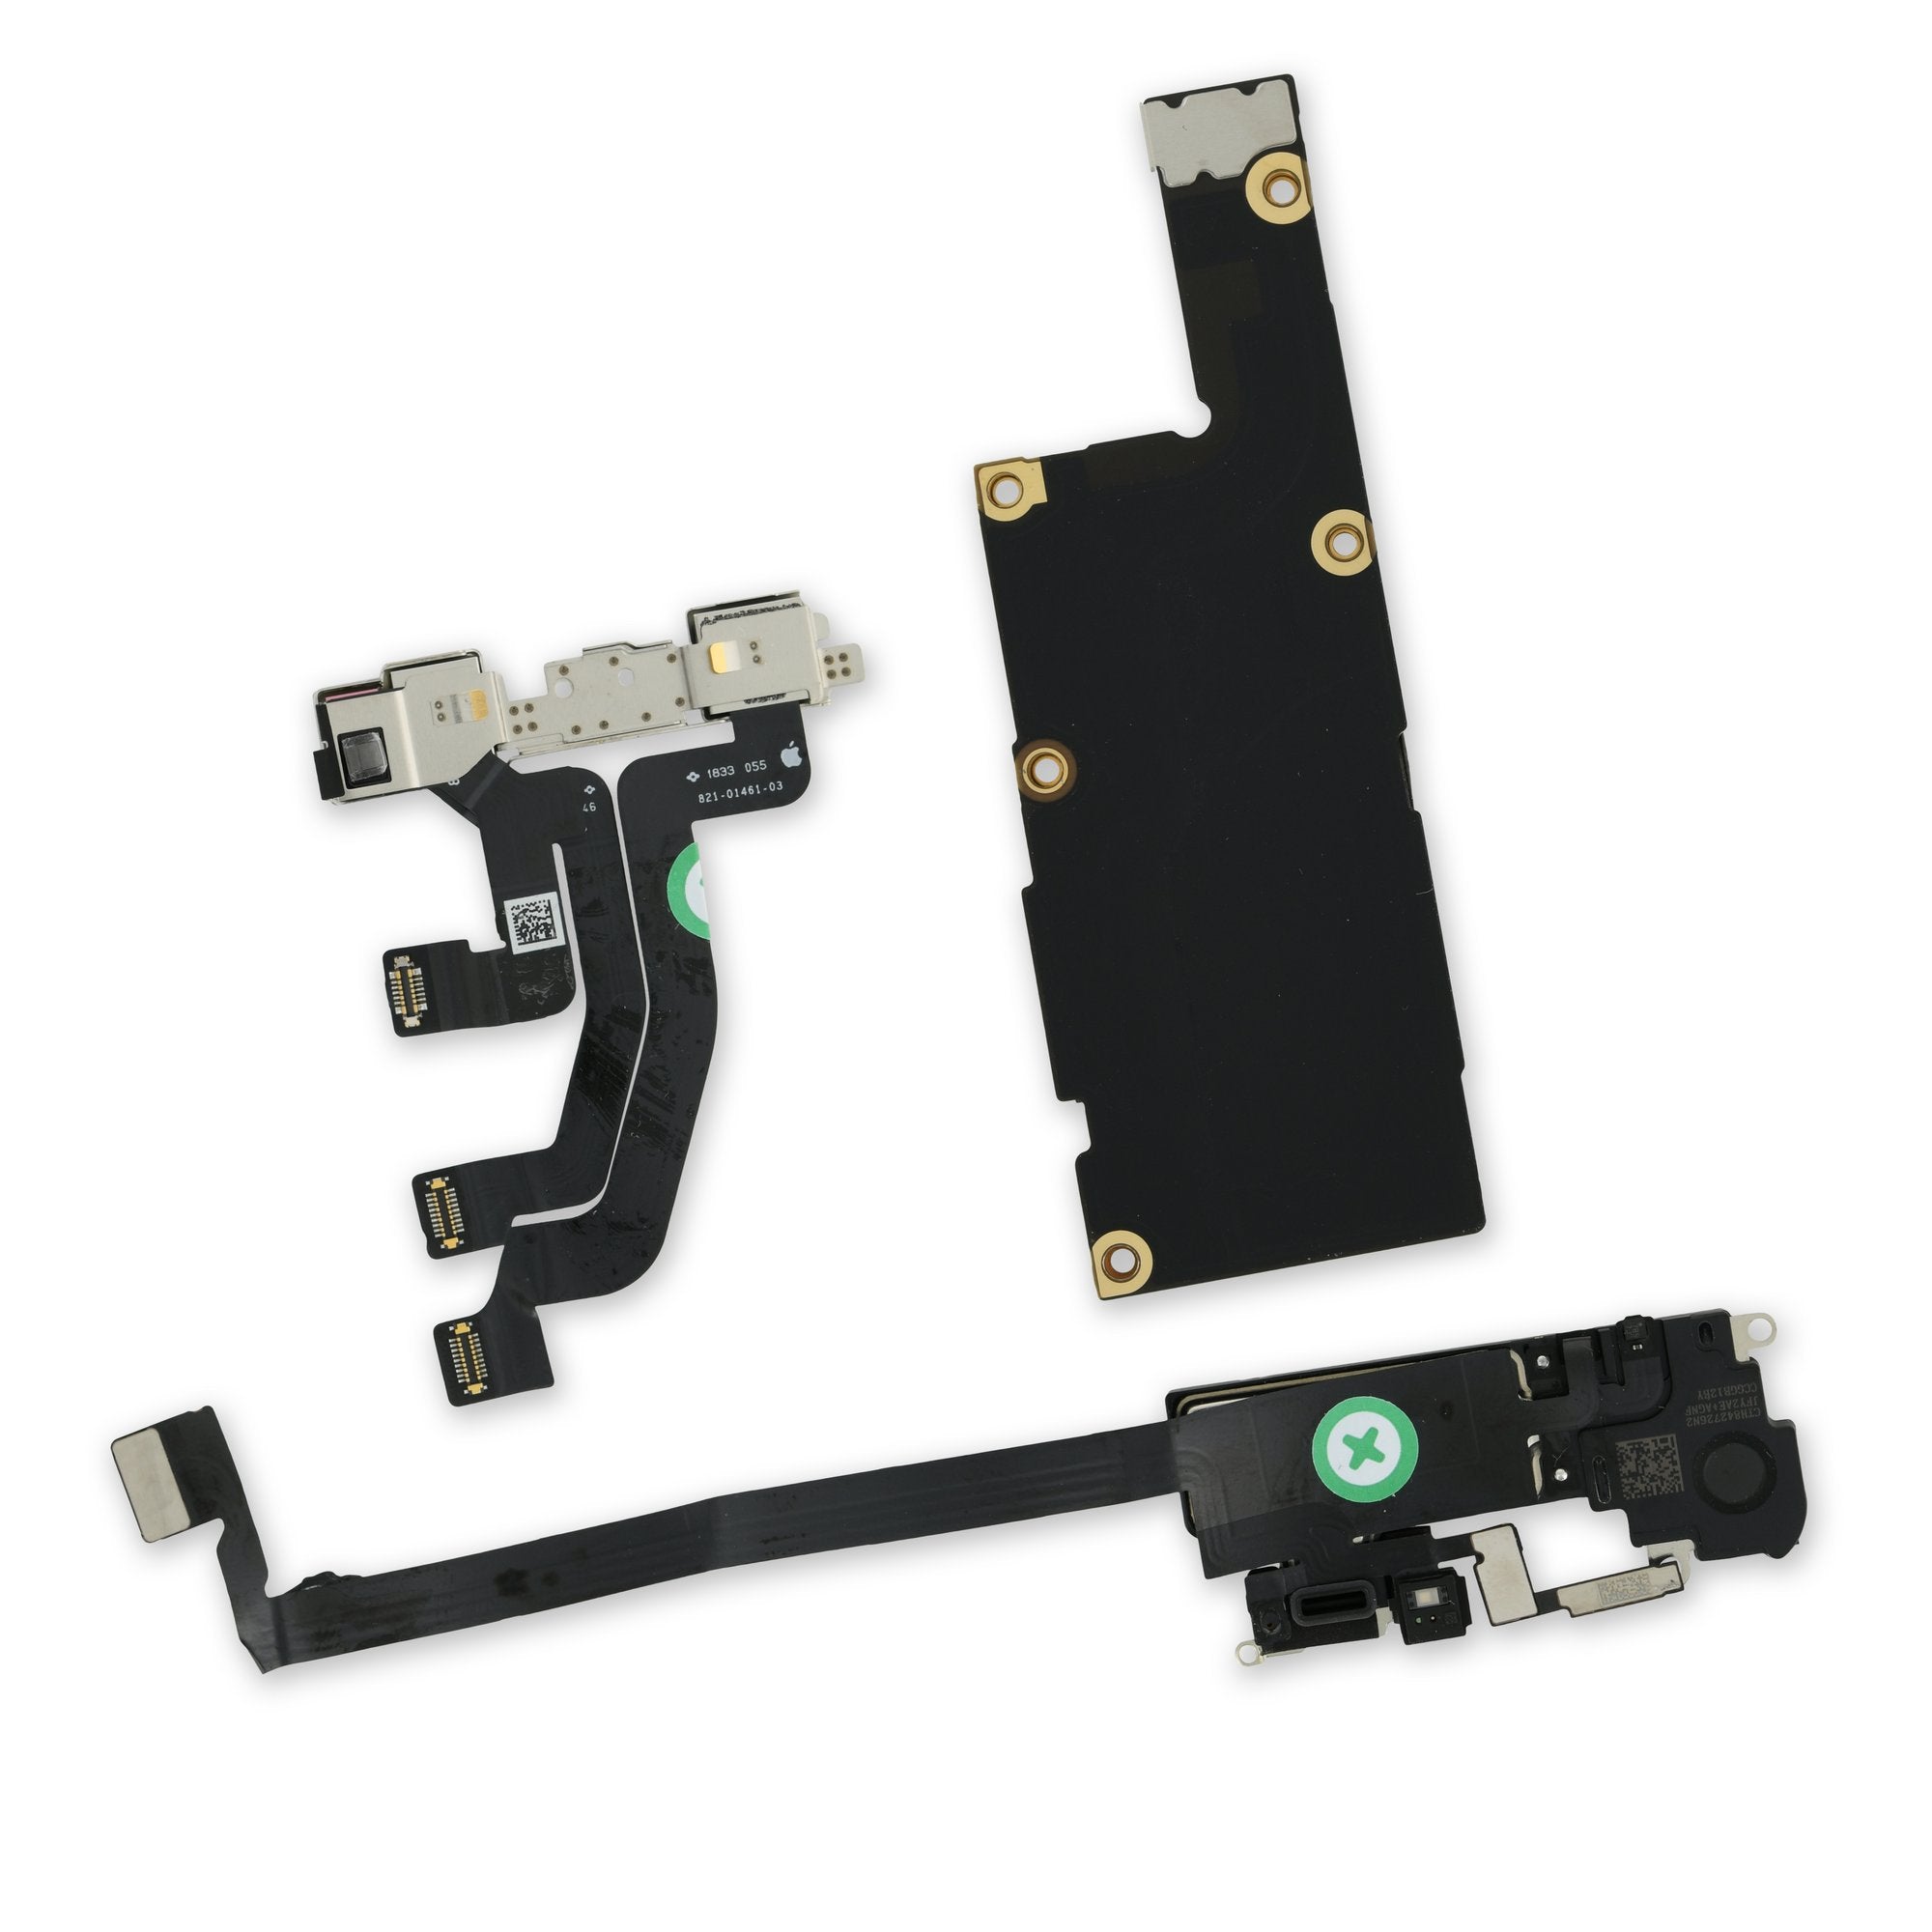 iPhone XS Max A1921 (Unlocked) Logic Board with Paired Face ID Sensors